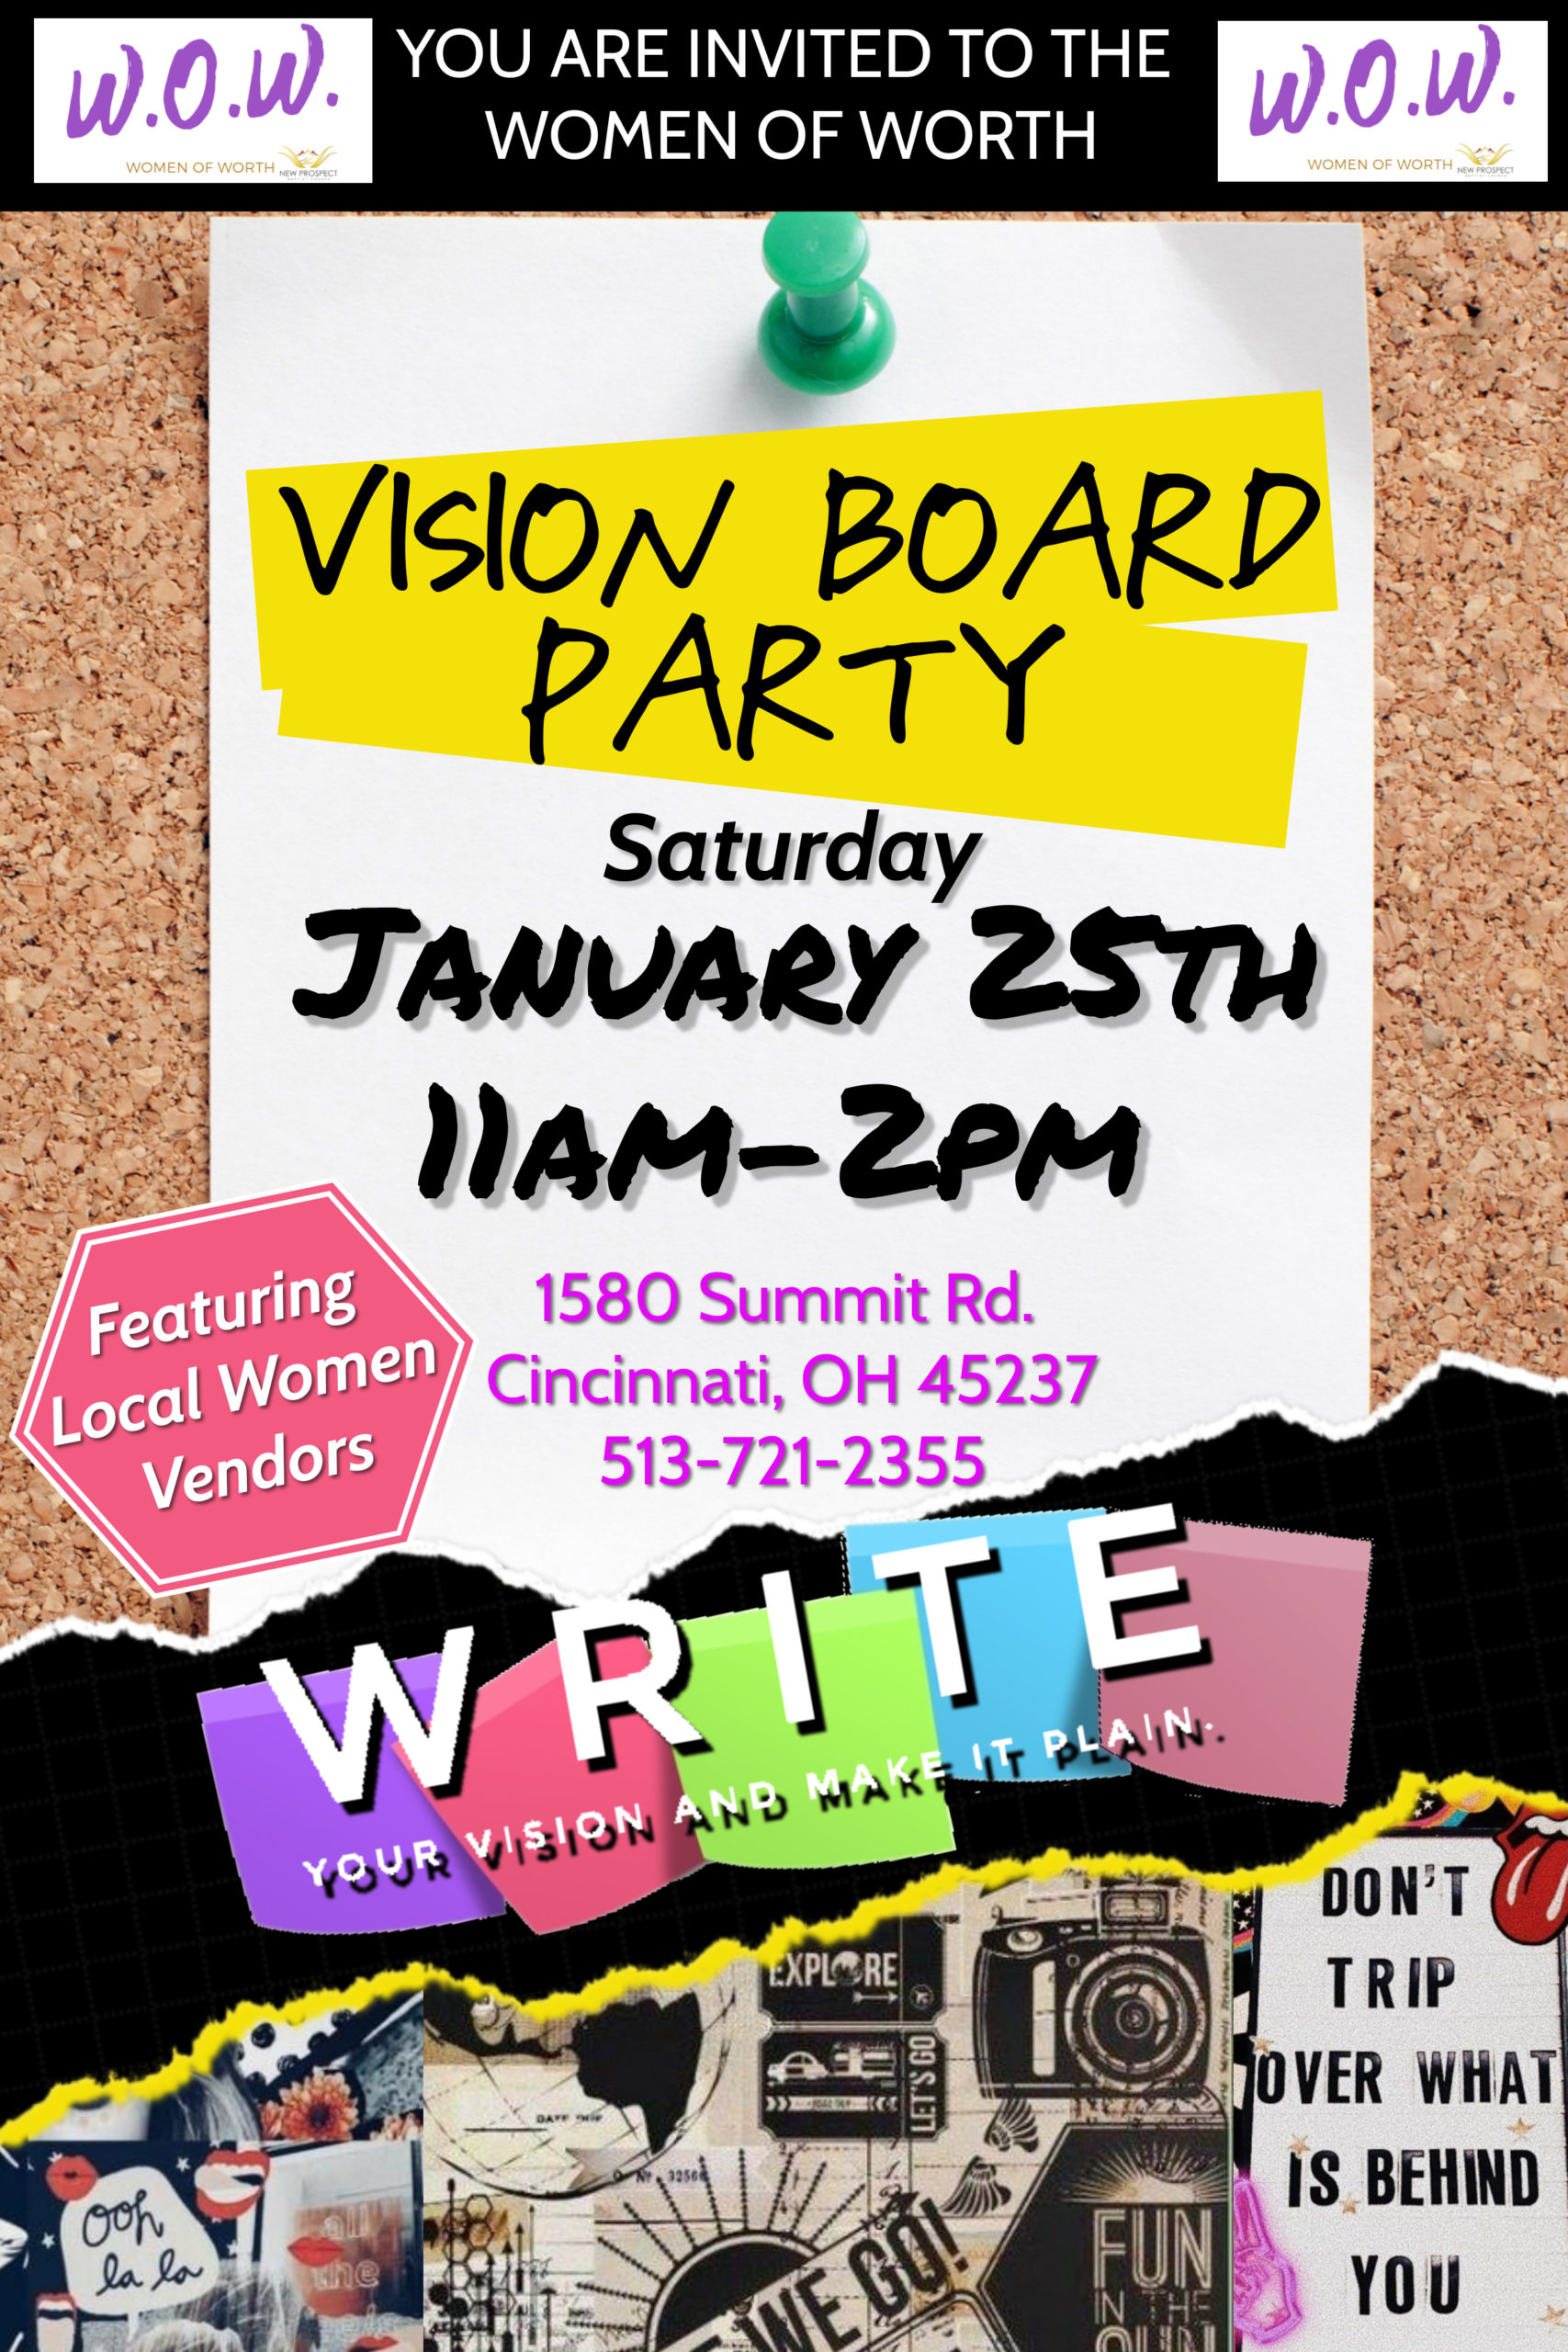 Women of Worth Vision Board Party on Saturday, January 25th at 11 a.m.